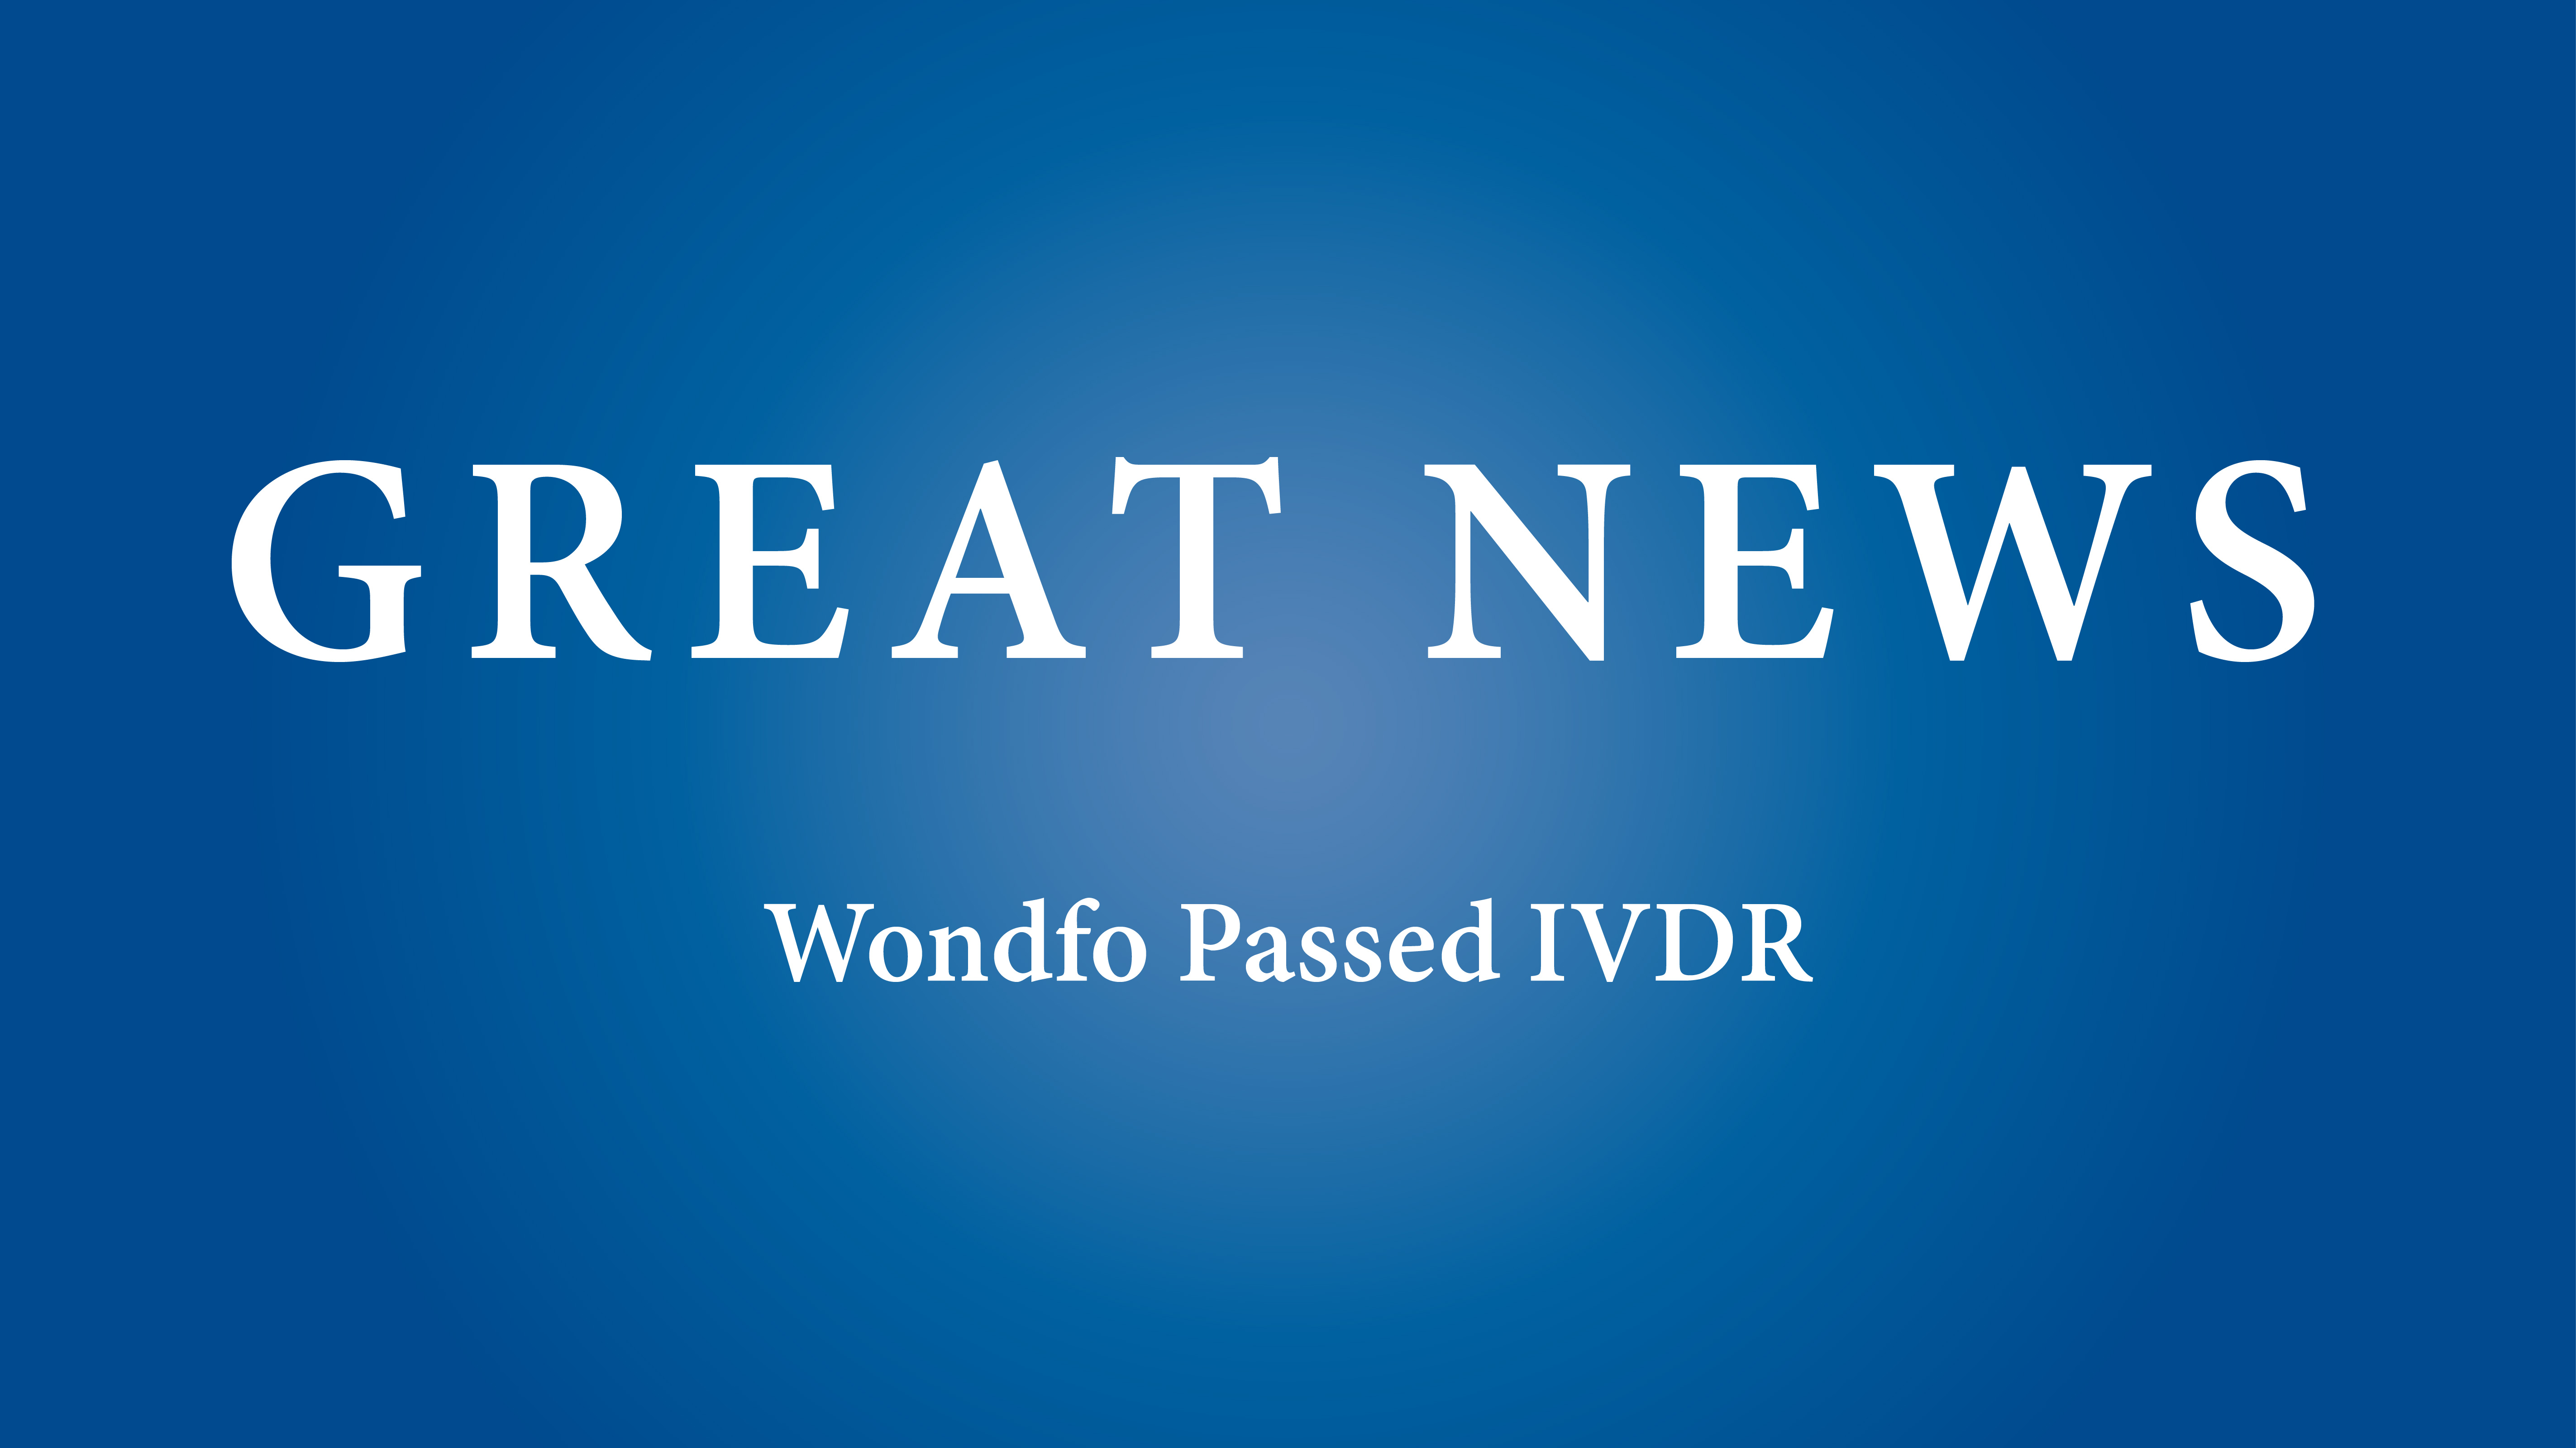 First in China! Wondfo Obtains IVDR Certificate in POCT Industry